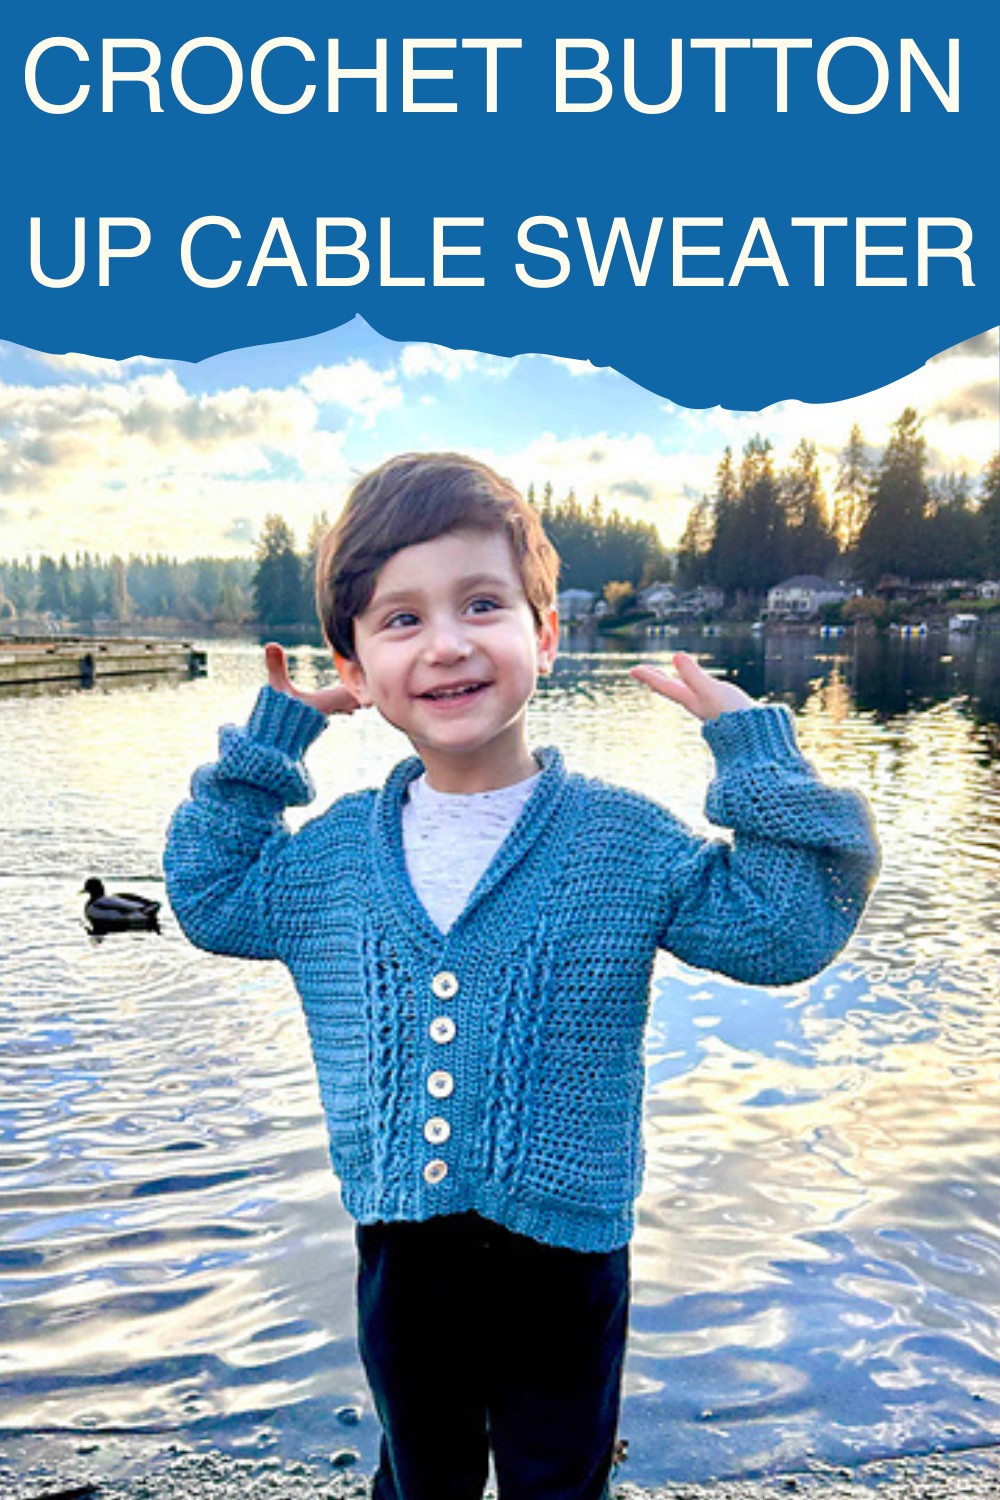 Crochet Button Up Cable Sweater Pattern